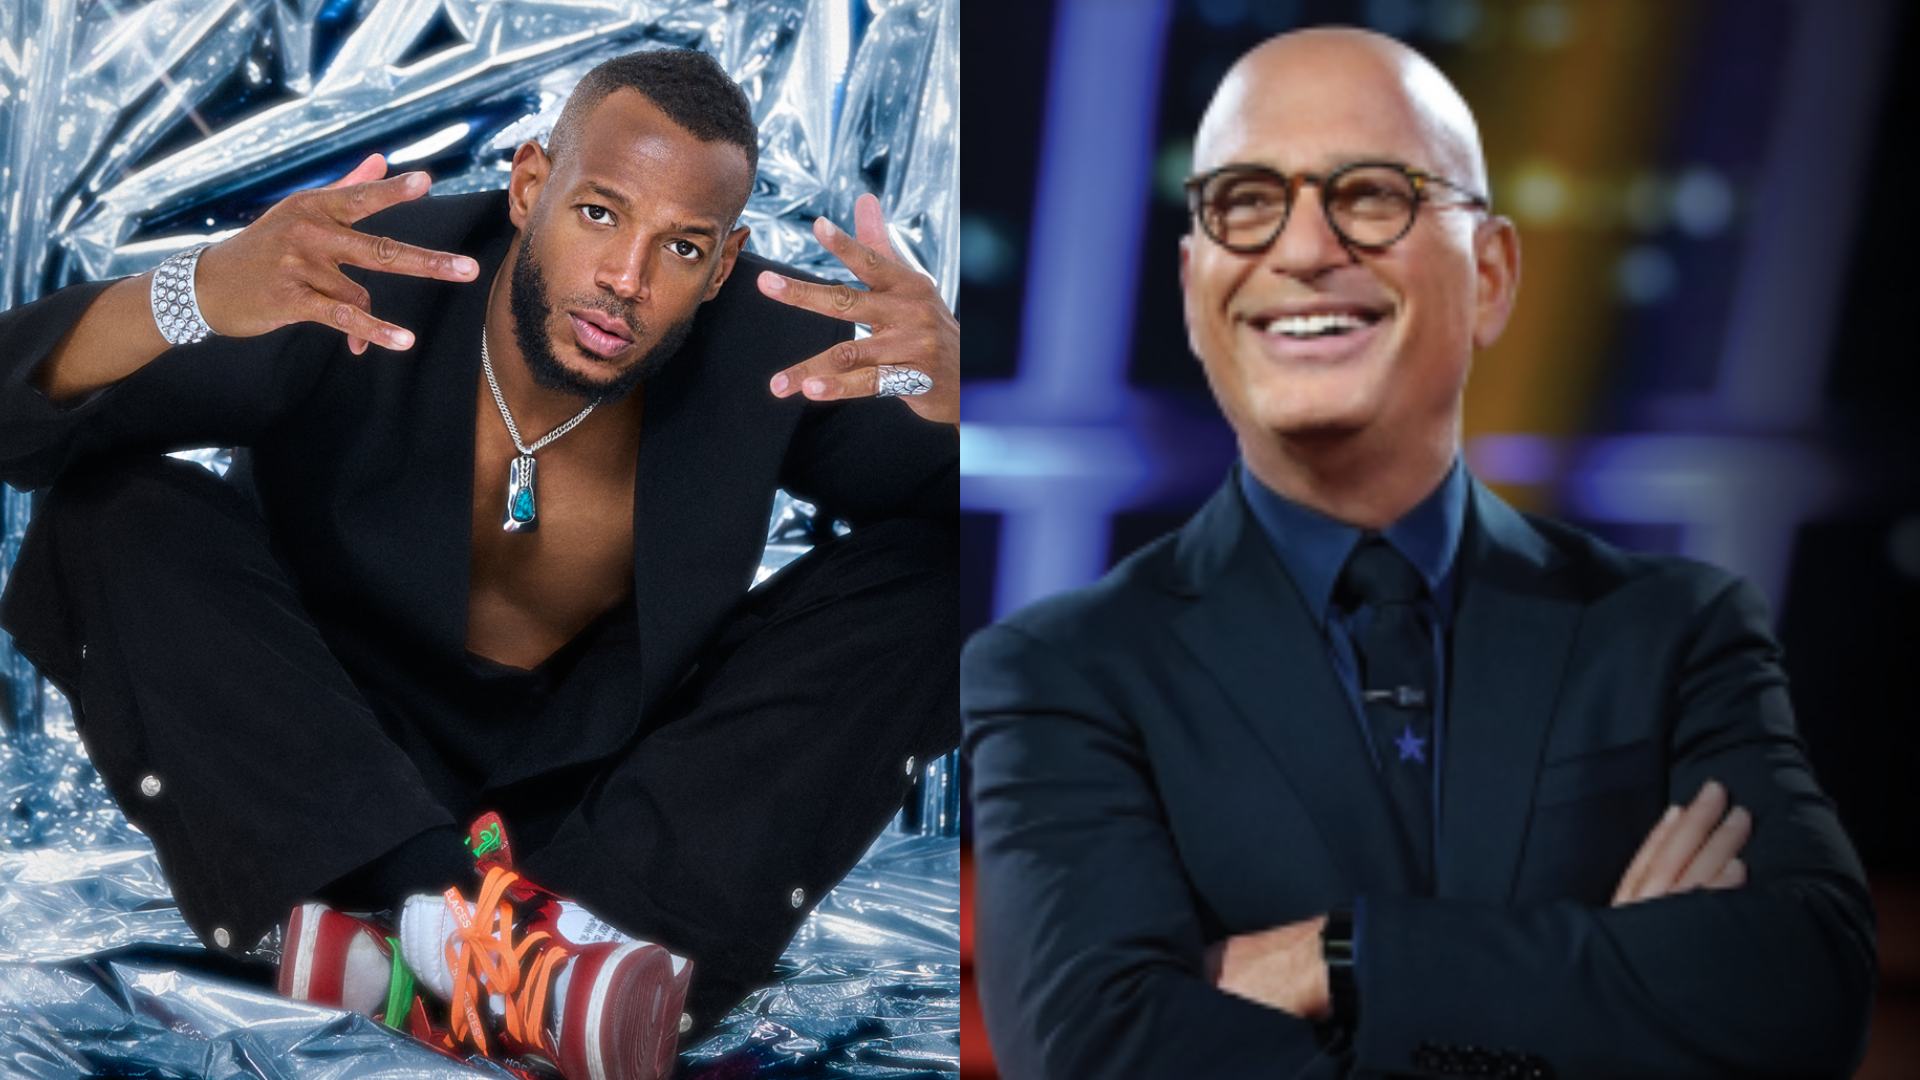 Coming to Fort Myers: Howie Mandel and Marlon Wayans